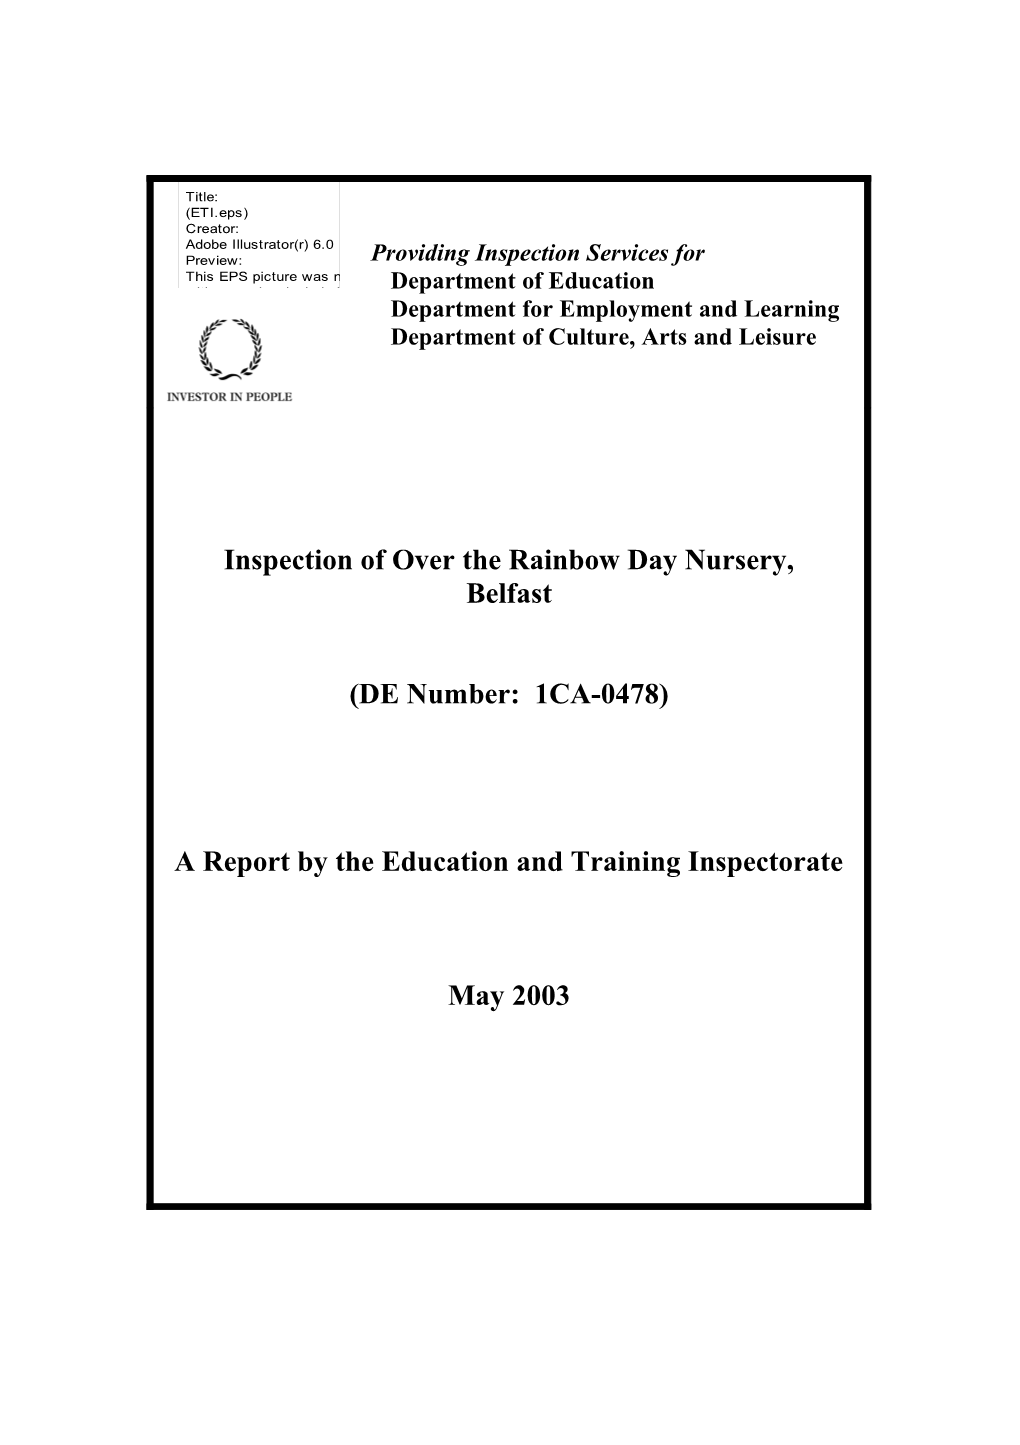 Report on the Inspection of Over the Rainbow Day Nursery, Eglantine Avenue, Belfast, May 2003